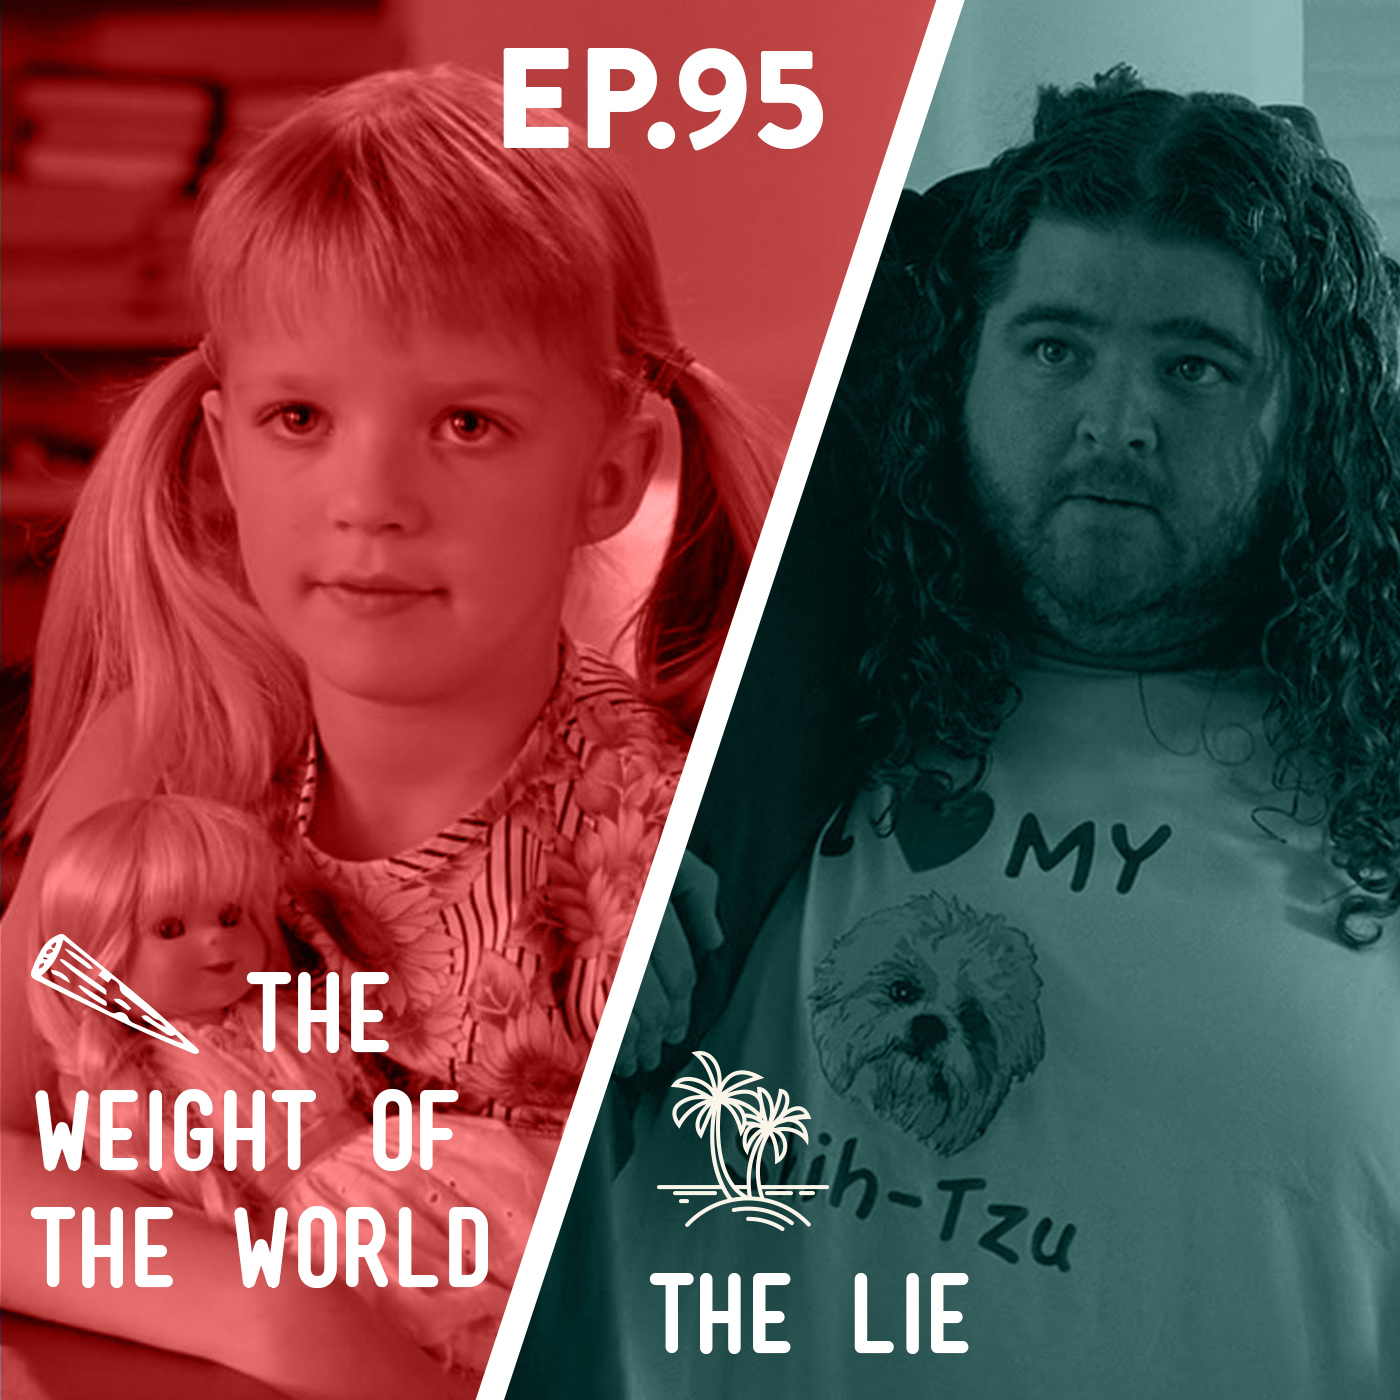 95 - The Weight of the World / The Lie